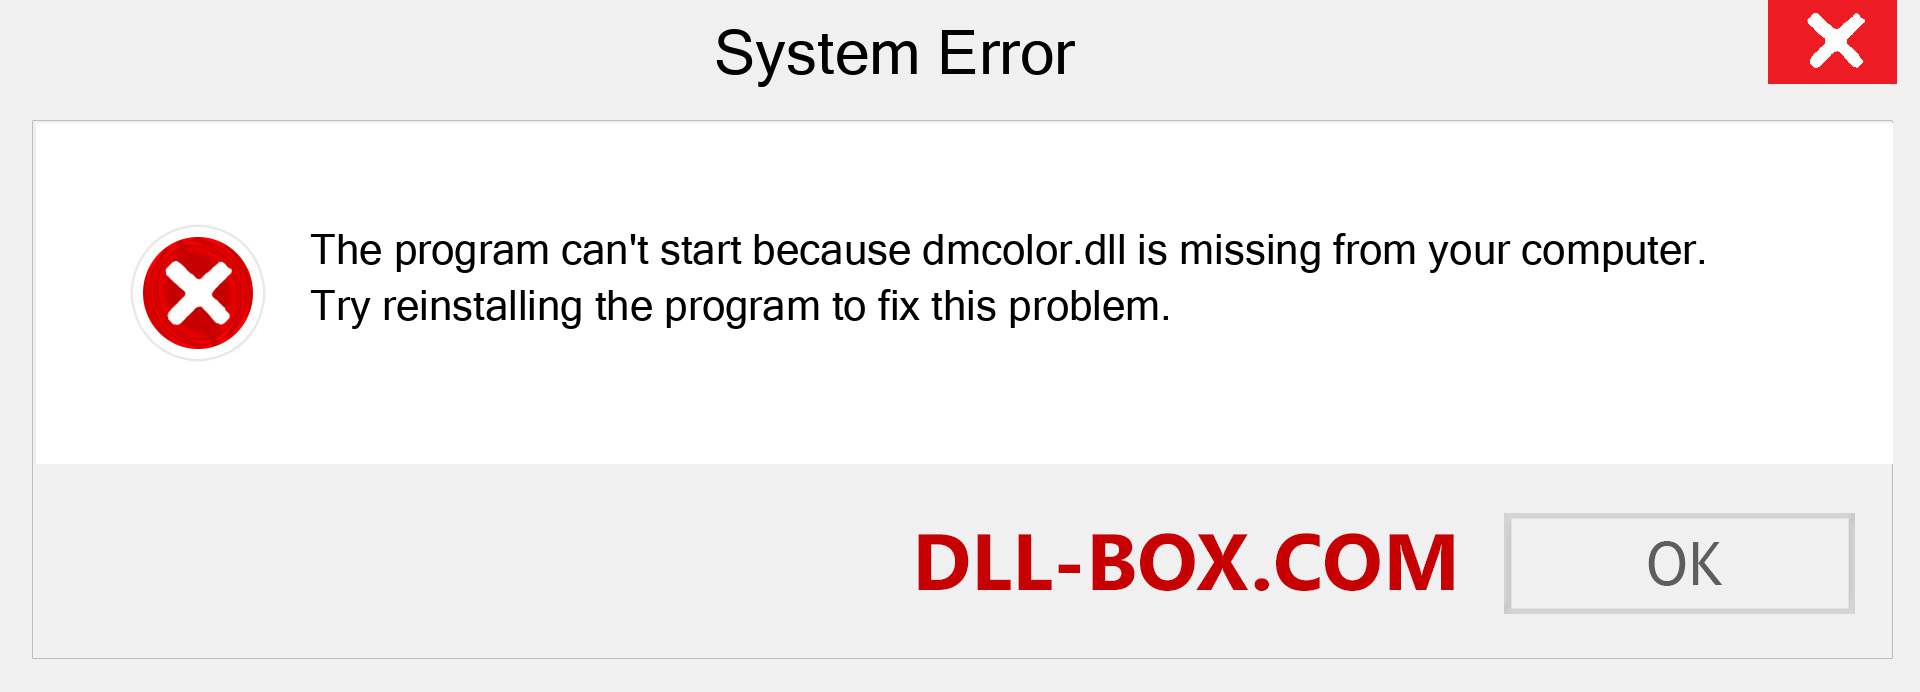  dmcolor.dll file is missing?. Download for Windows 7, 8, 10 - Fix  dmcolor dll Missing Error on Windows, photos, images